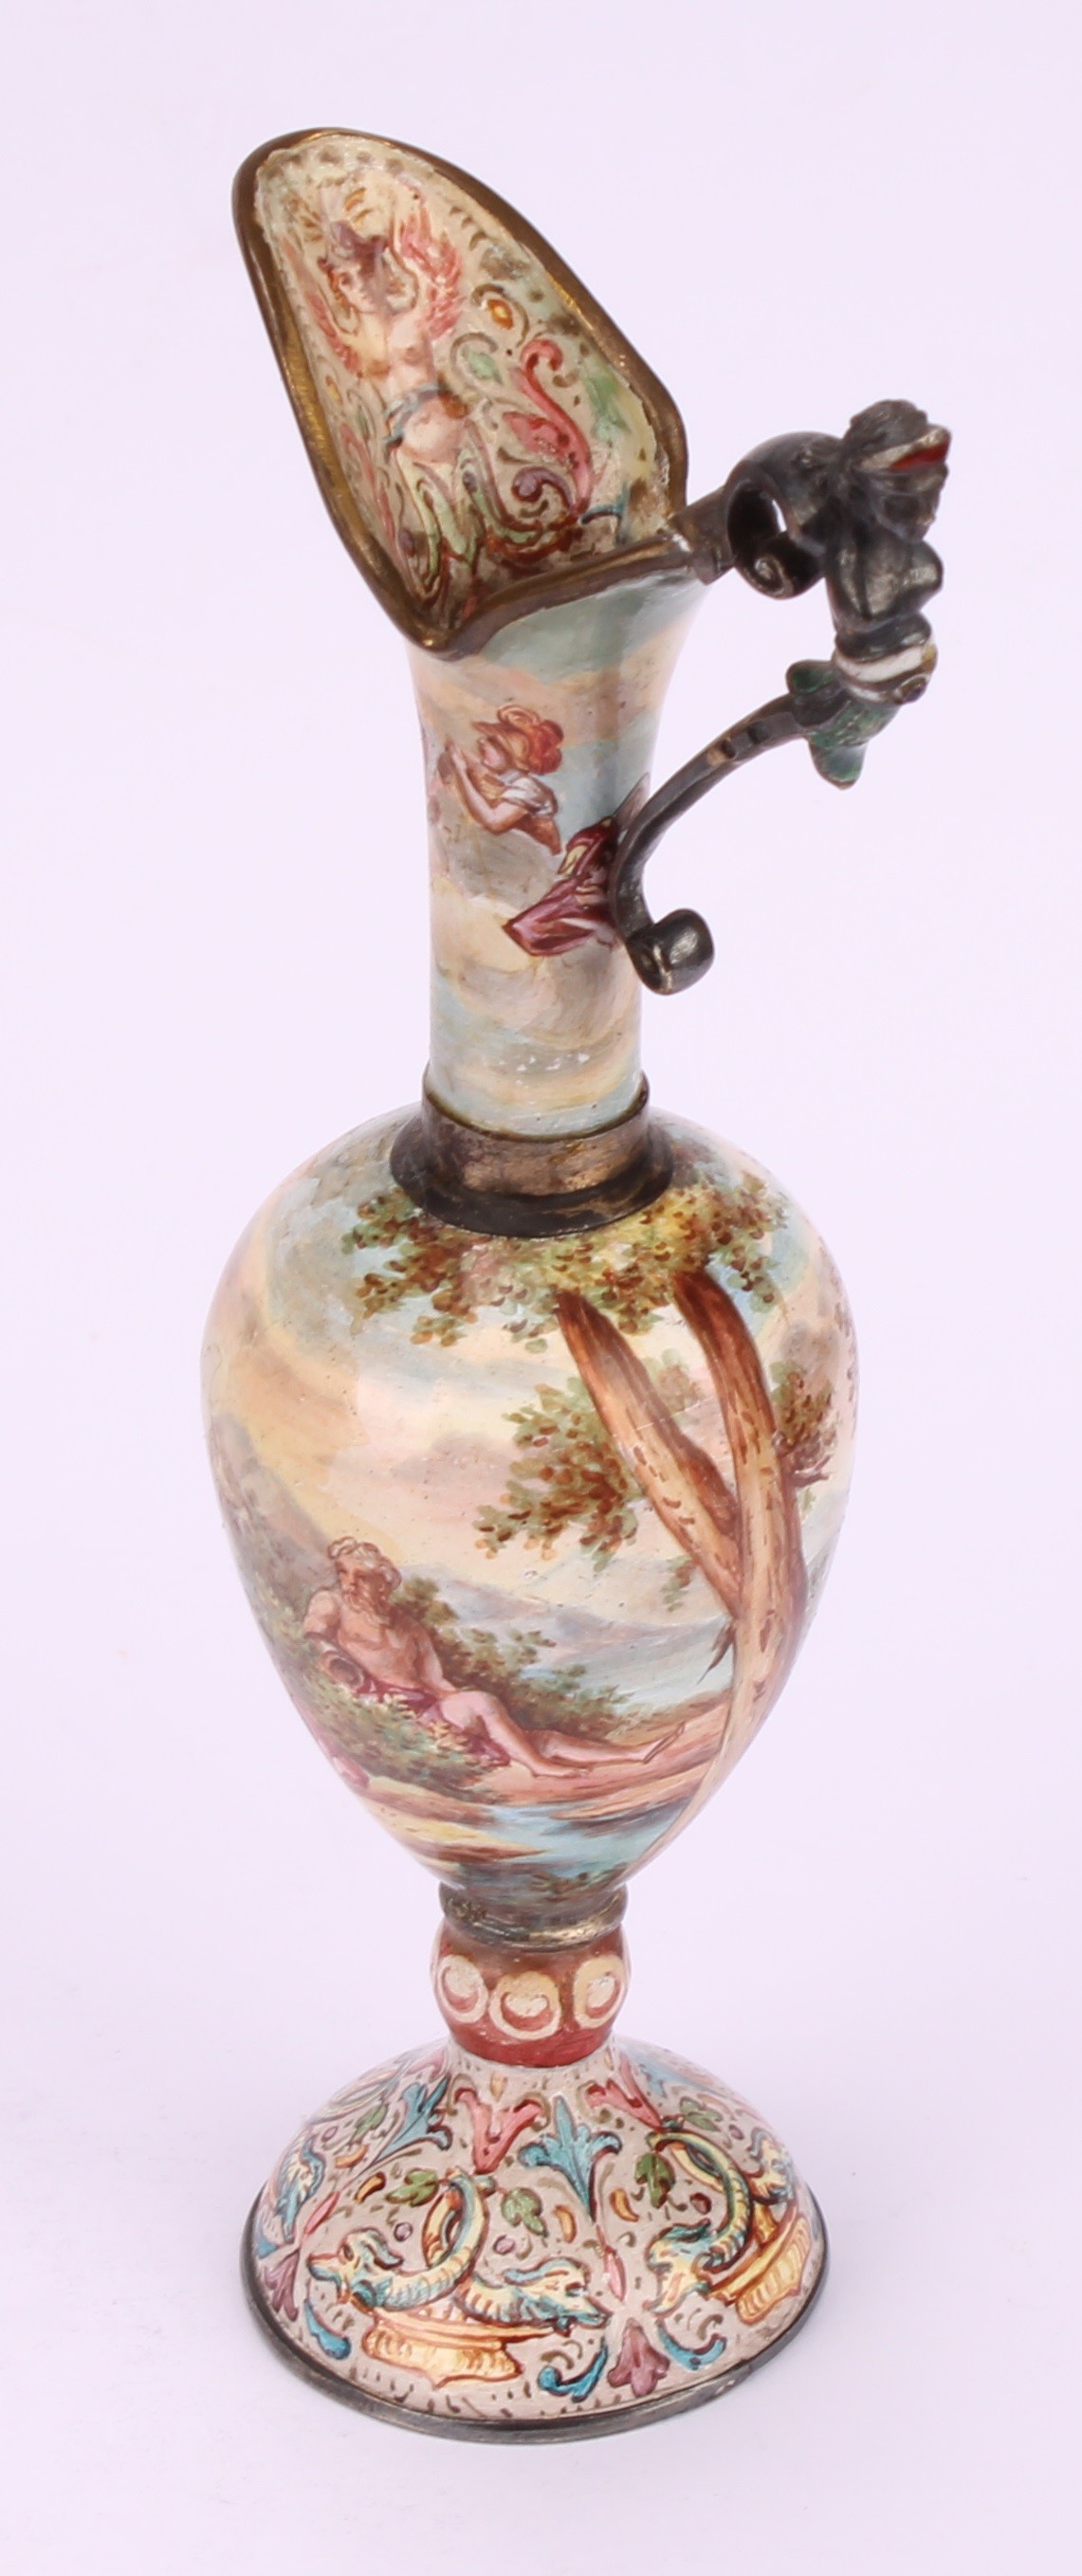 An Austrian enamel miniature ewer and basin, decorated in polychrome in the 18th century taste - Image 6 of 13